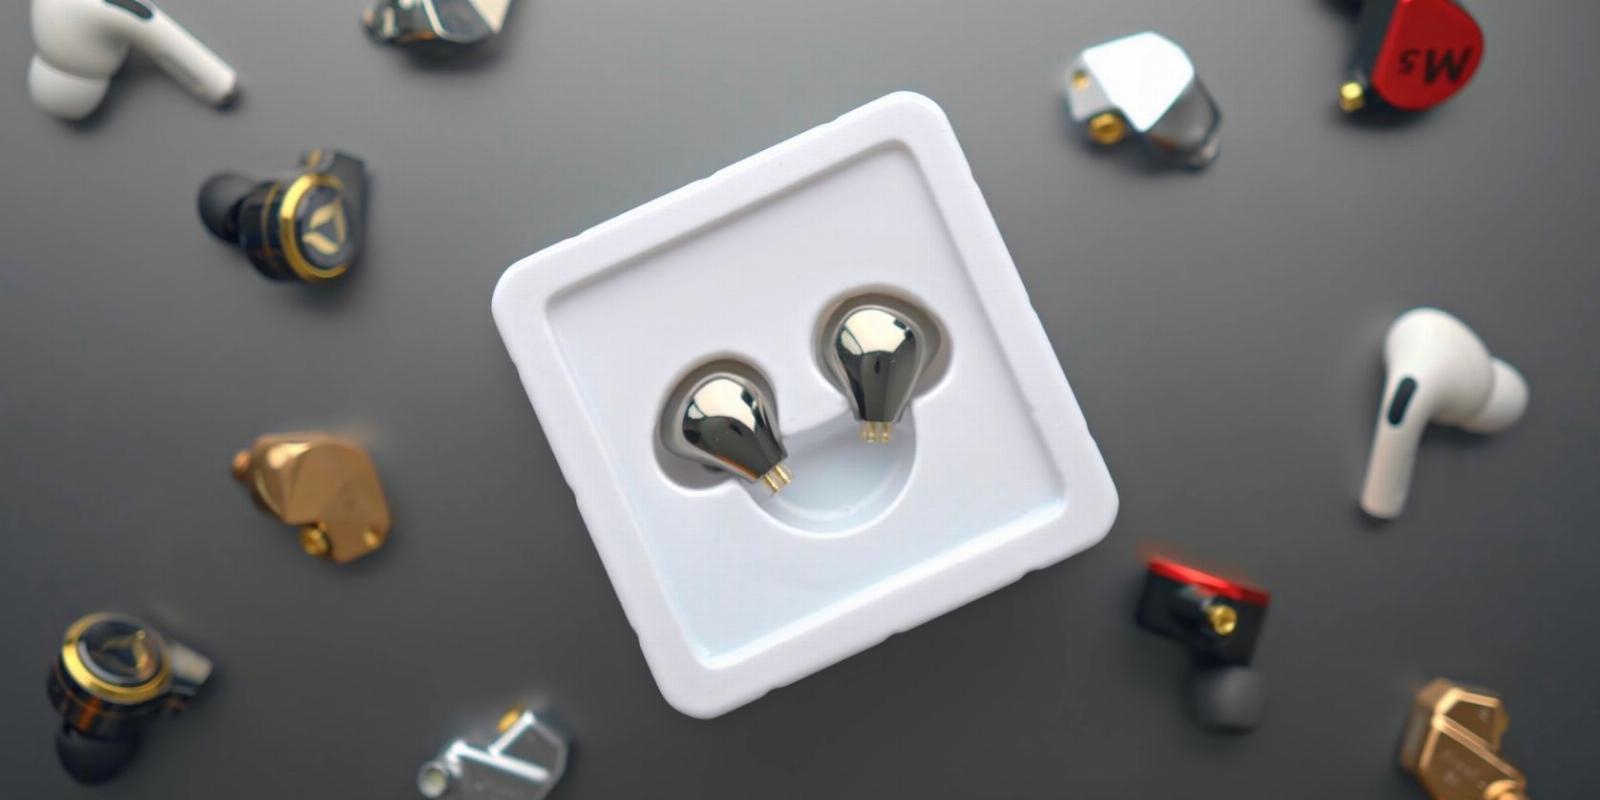 In-Ear Monitor Buying Guide: 10 Things to Check